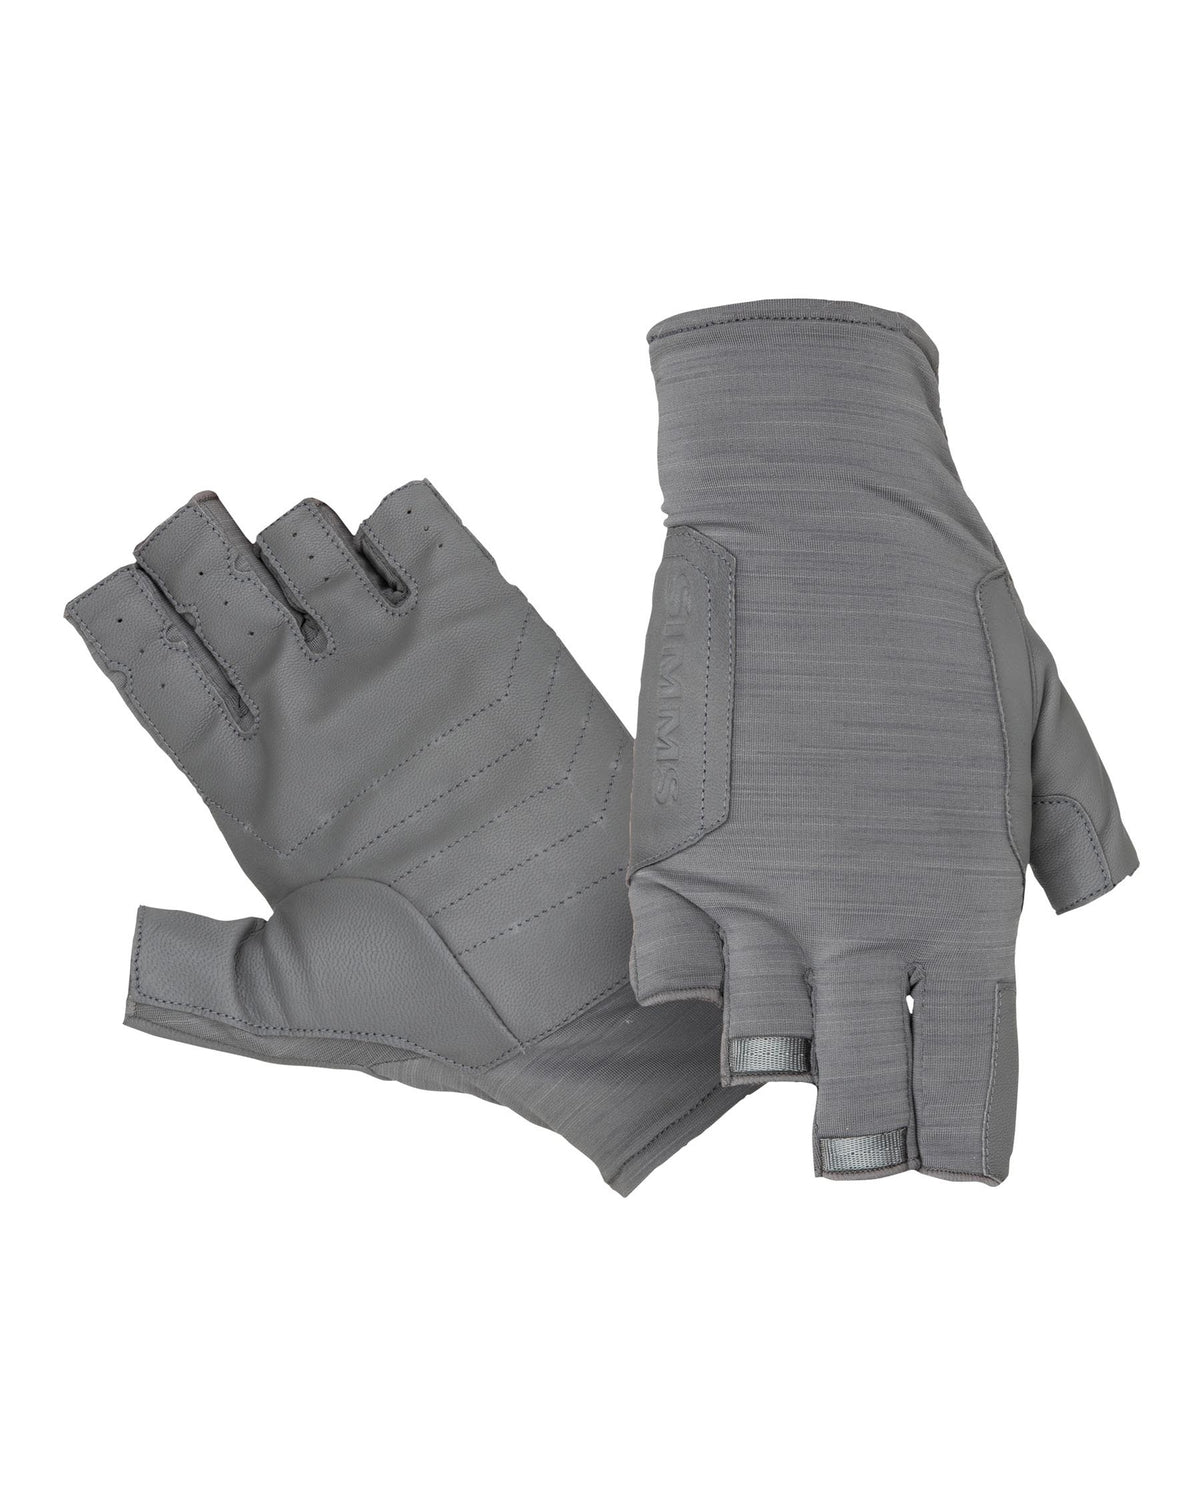 Simms Solarflex Guide Glove — Red's Fly Shop